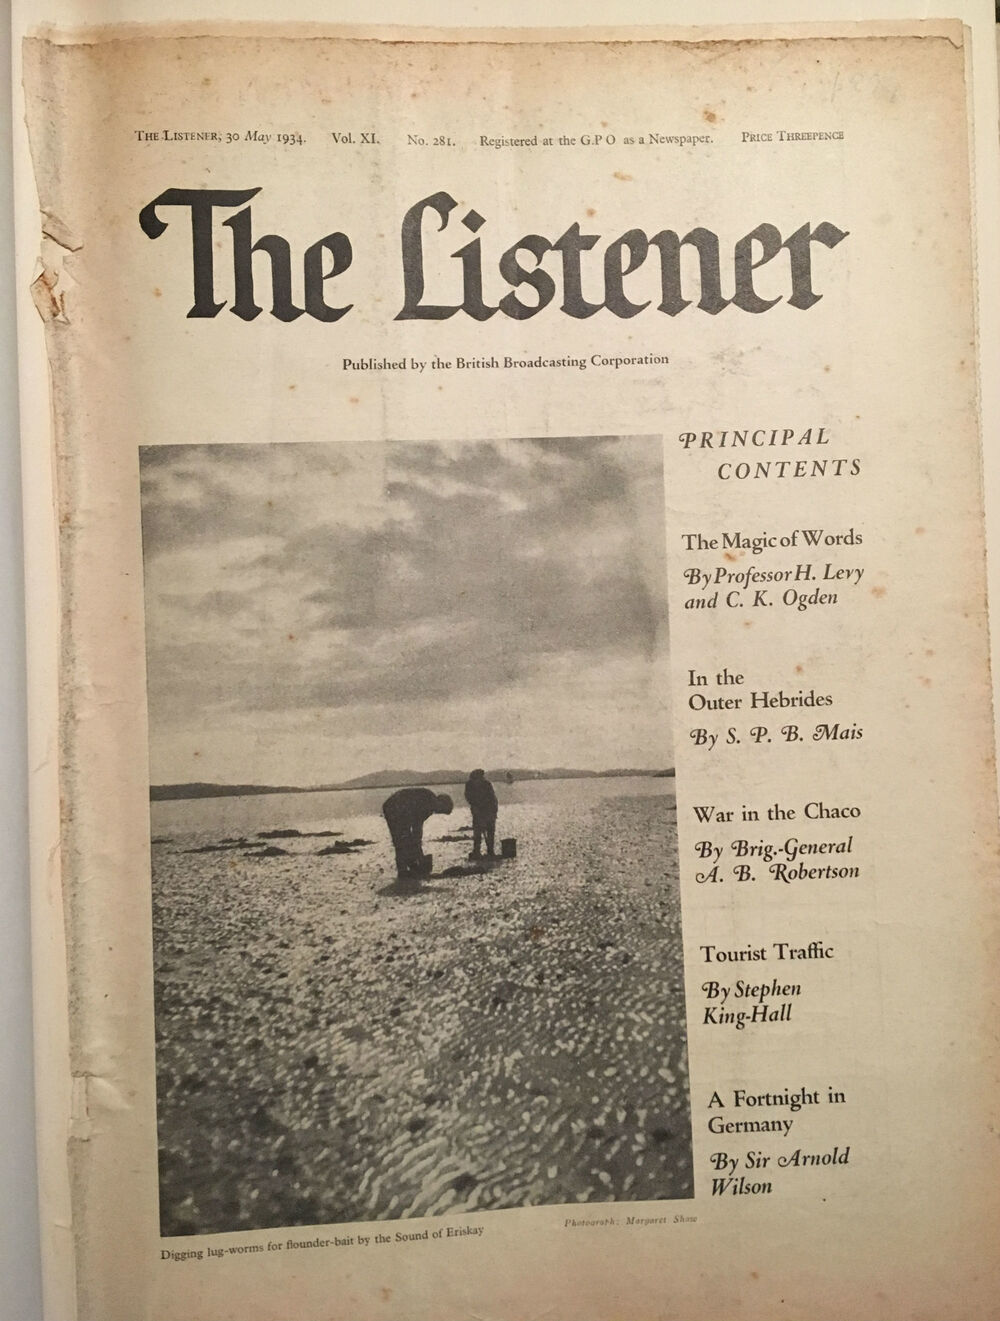 Digging for Lugworms, ‘The Listener’, 1934